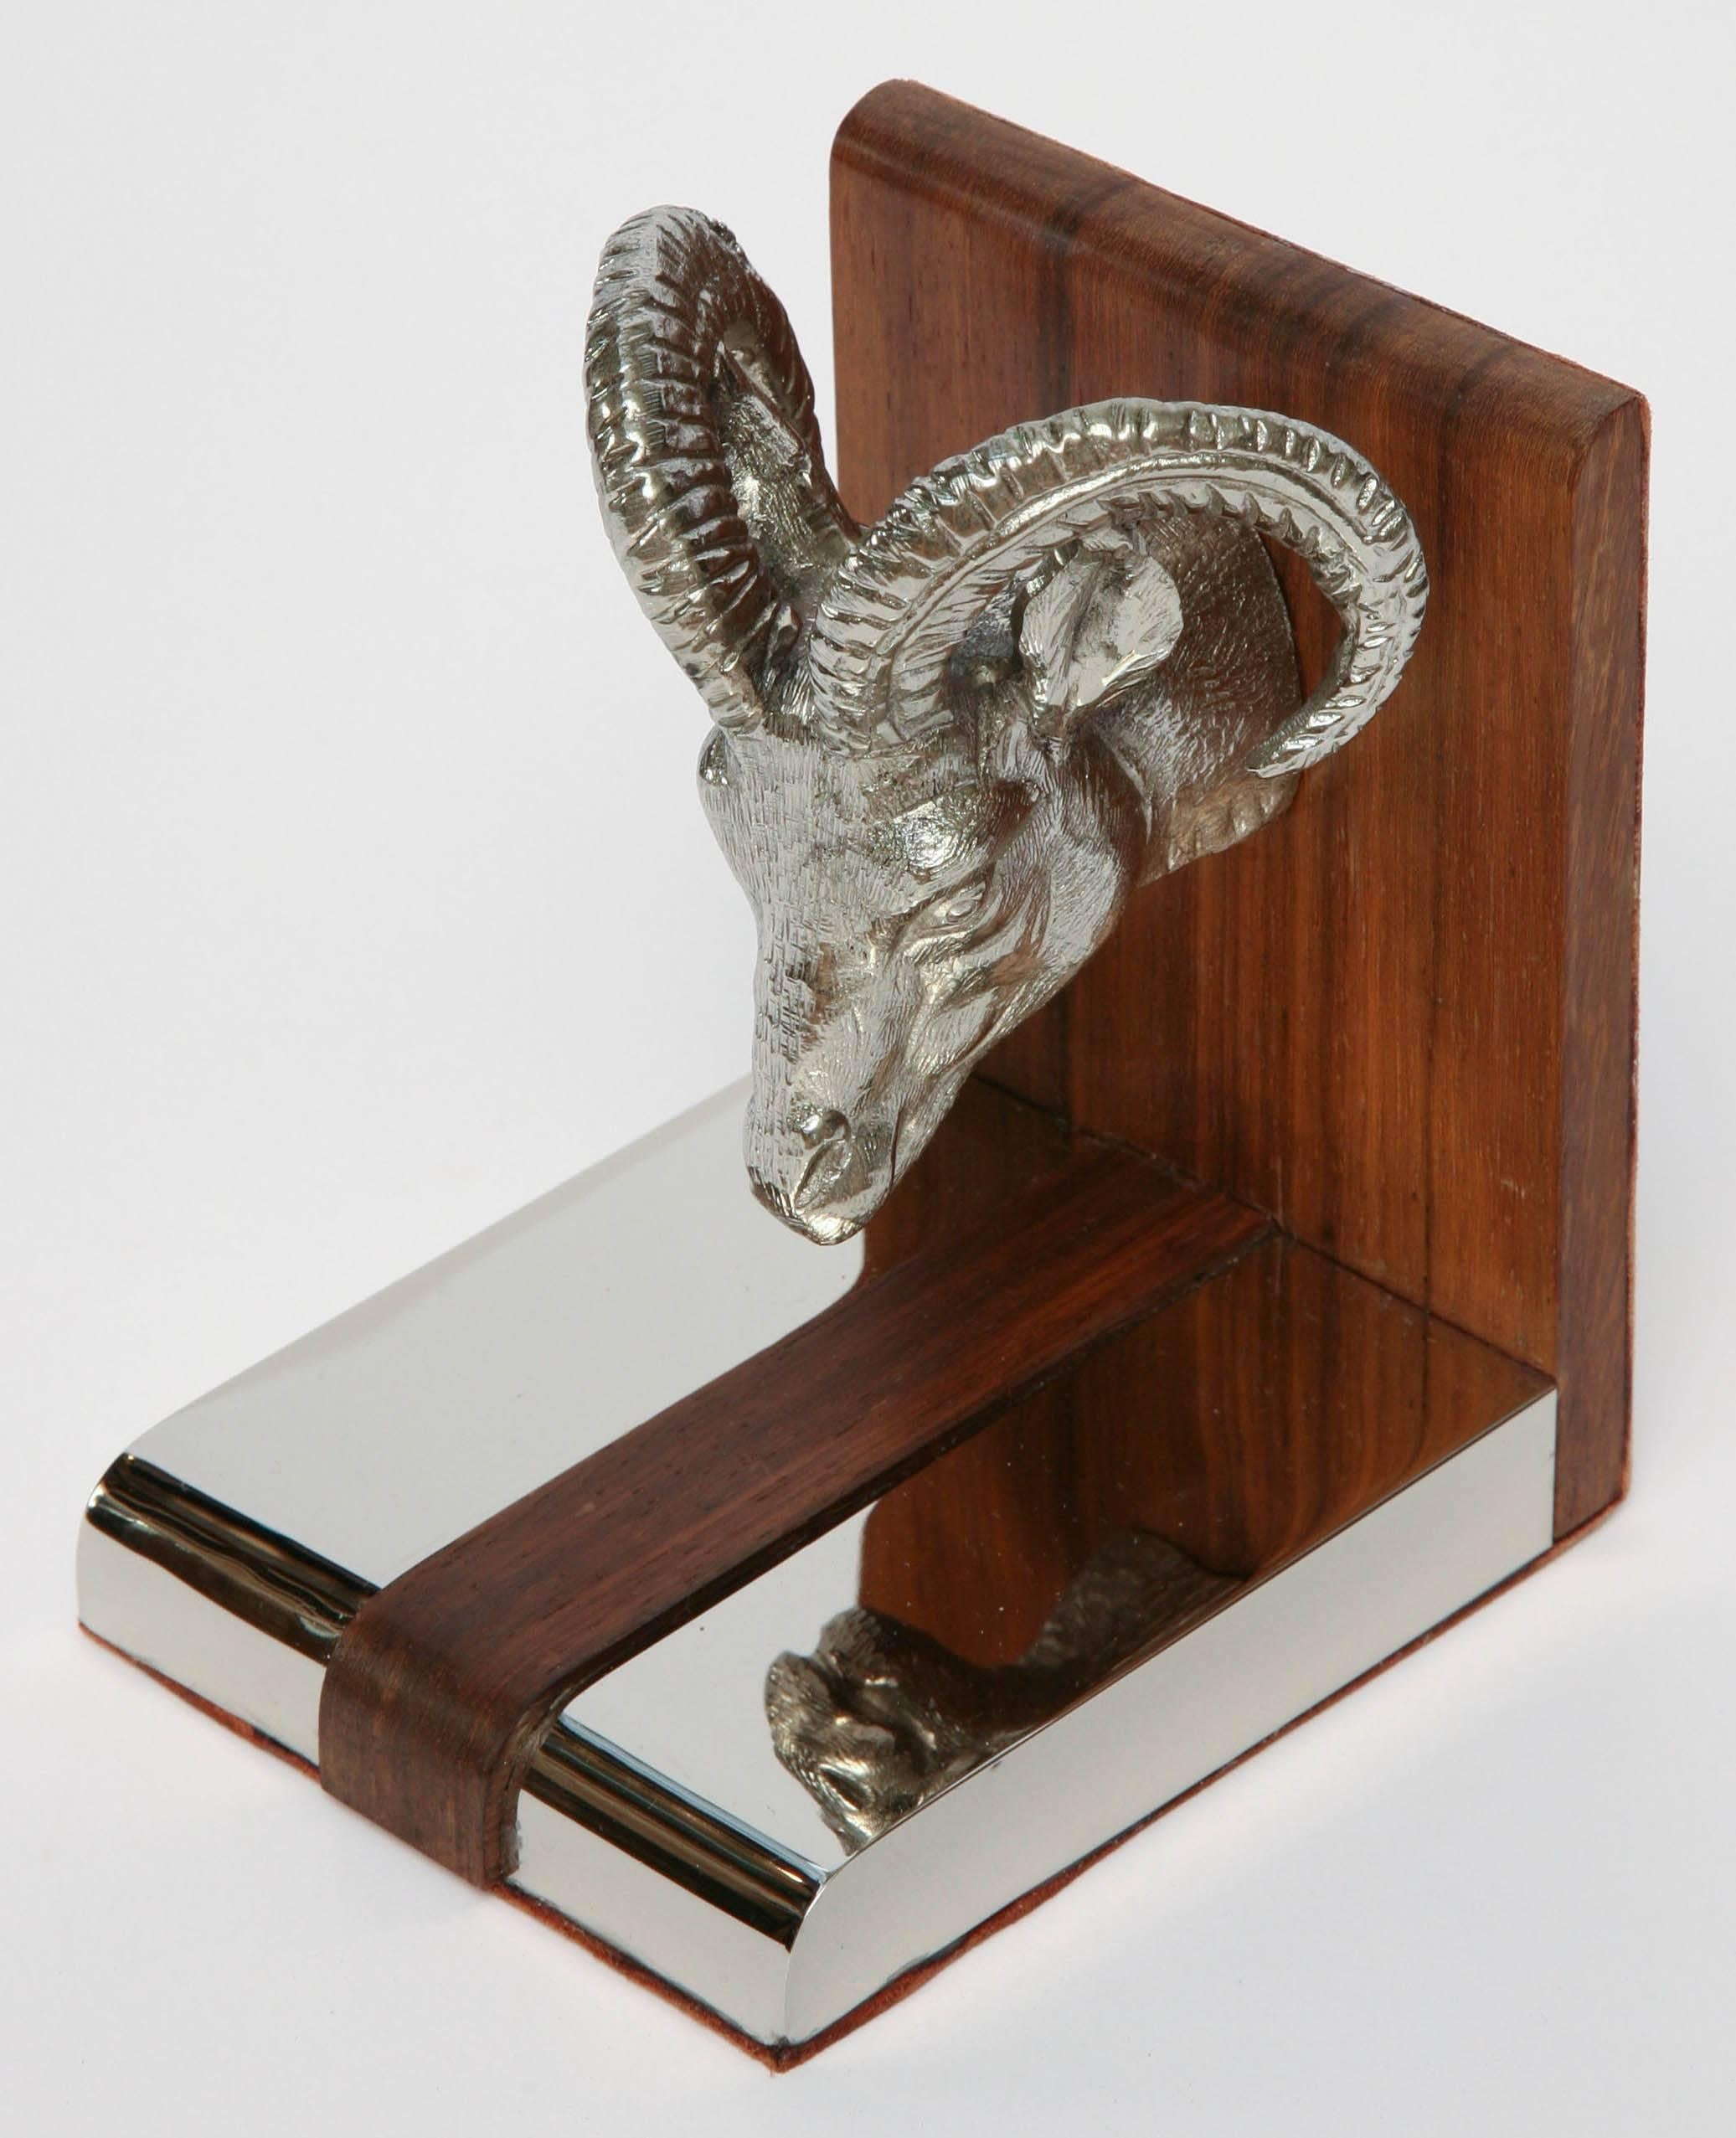 20th Century Vintage Gucci Ram's Head Bookends